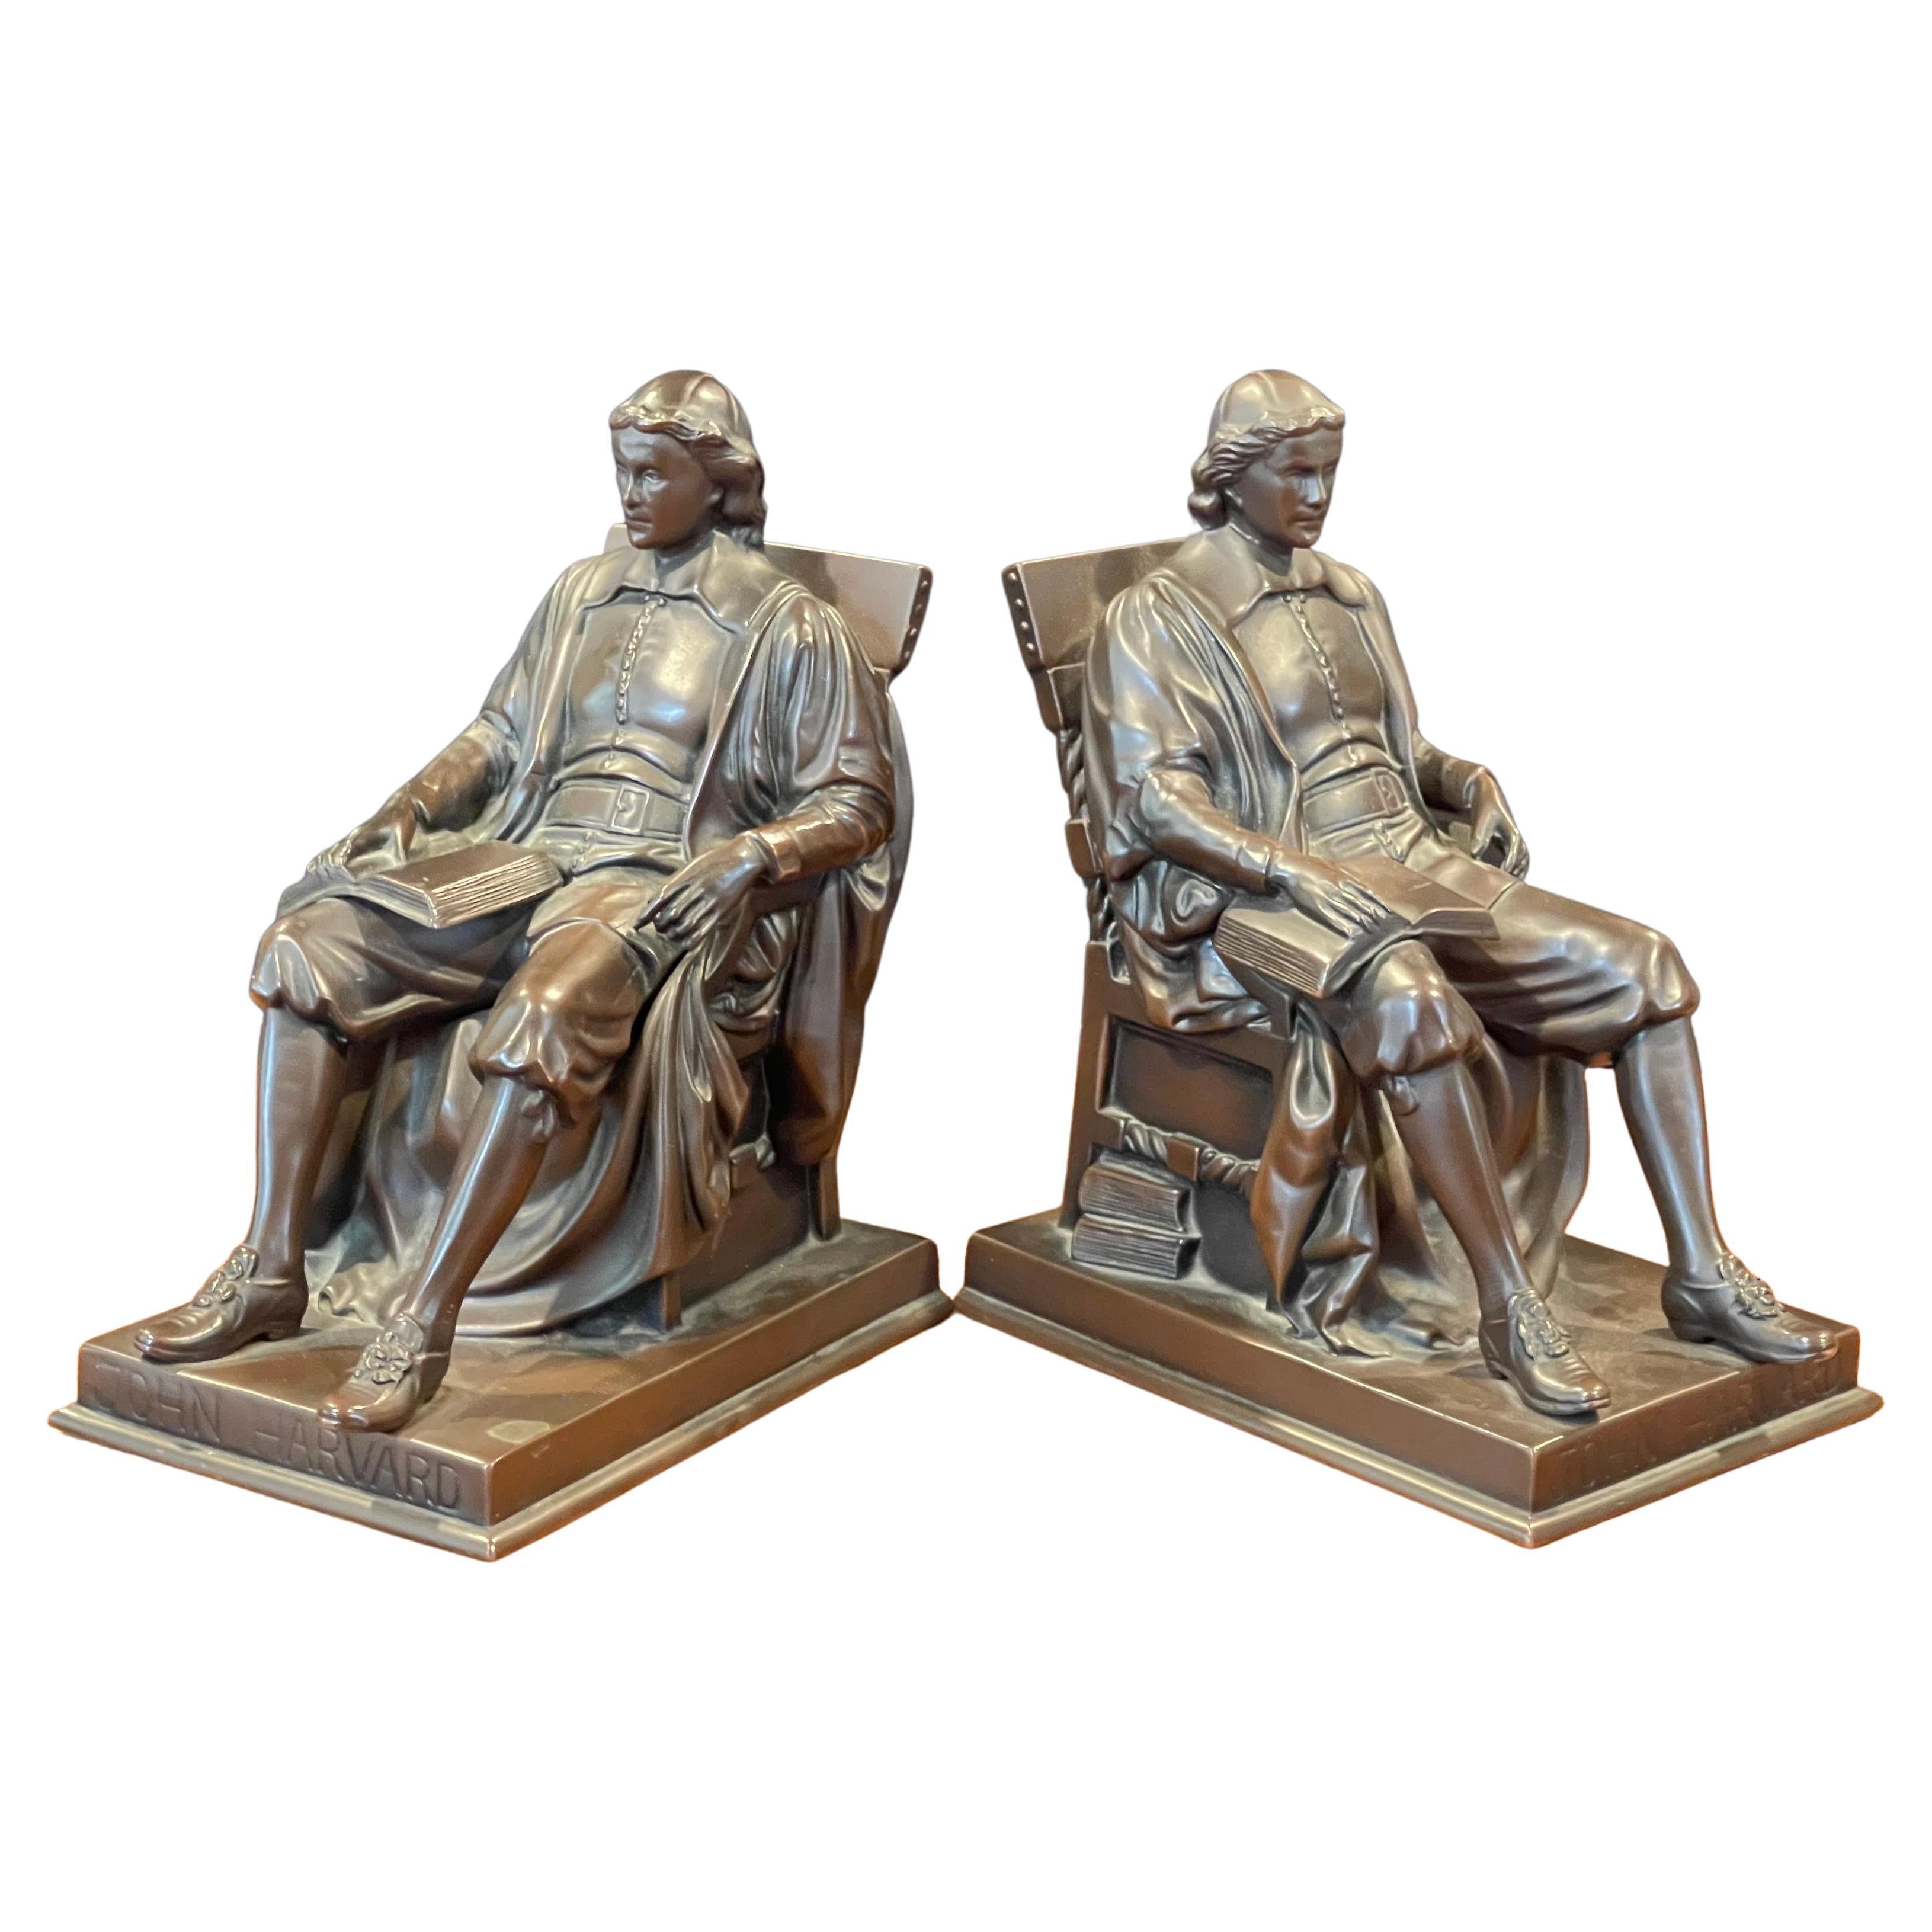 A pair of vintage John Harvard bronze bookends by Jennings Brothers metal foundry modeled after Daniel Chester French's life-sized bronze original which stands in Harvard Yard in Cambridge, MA., circa 1940s.  The set are well casted, heavy and in a